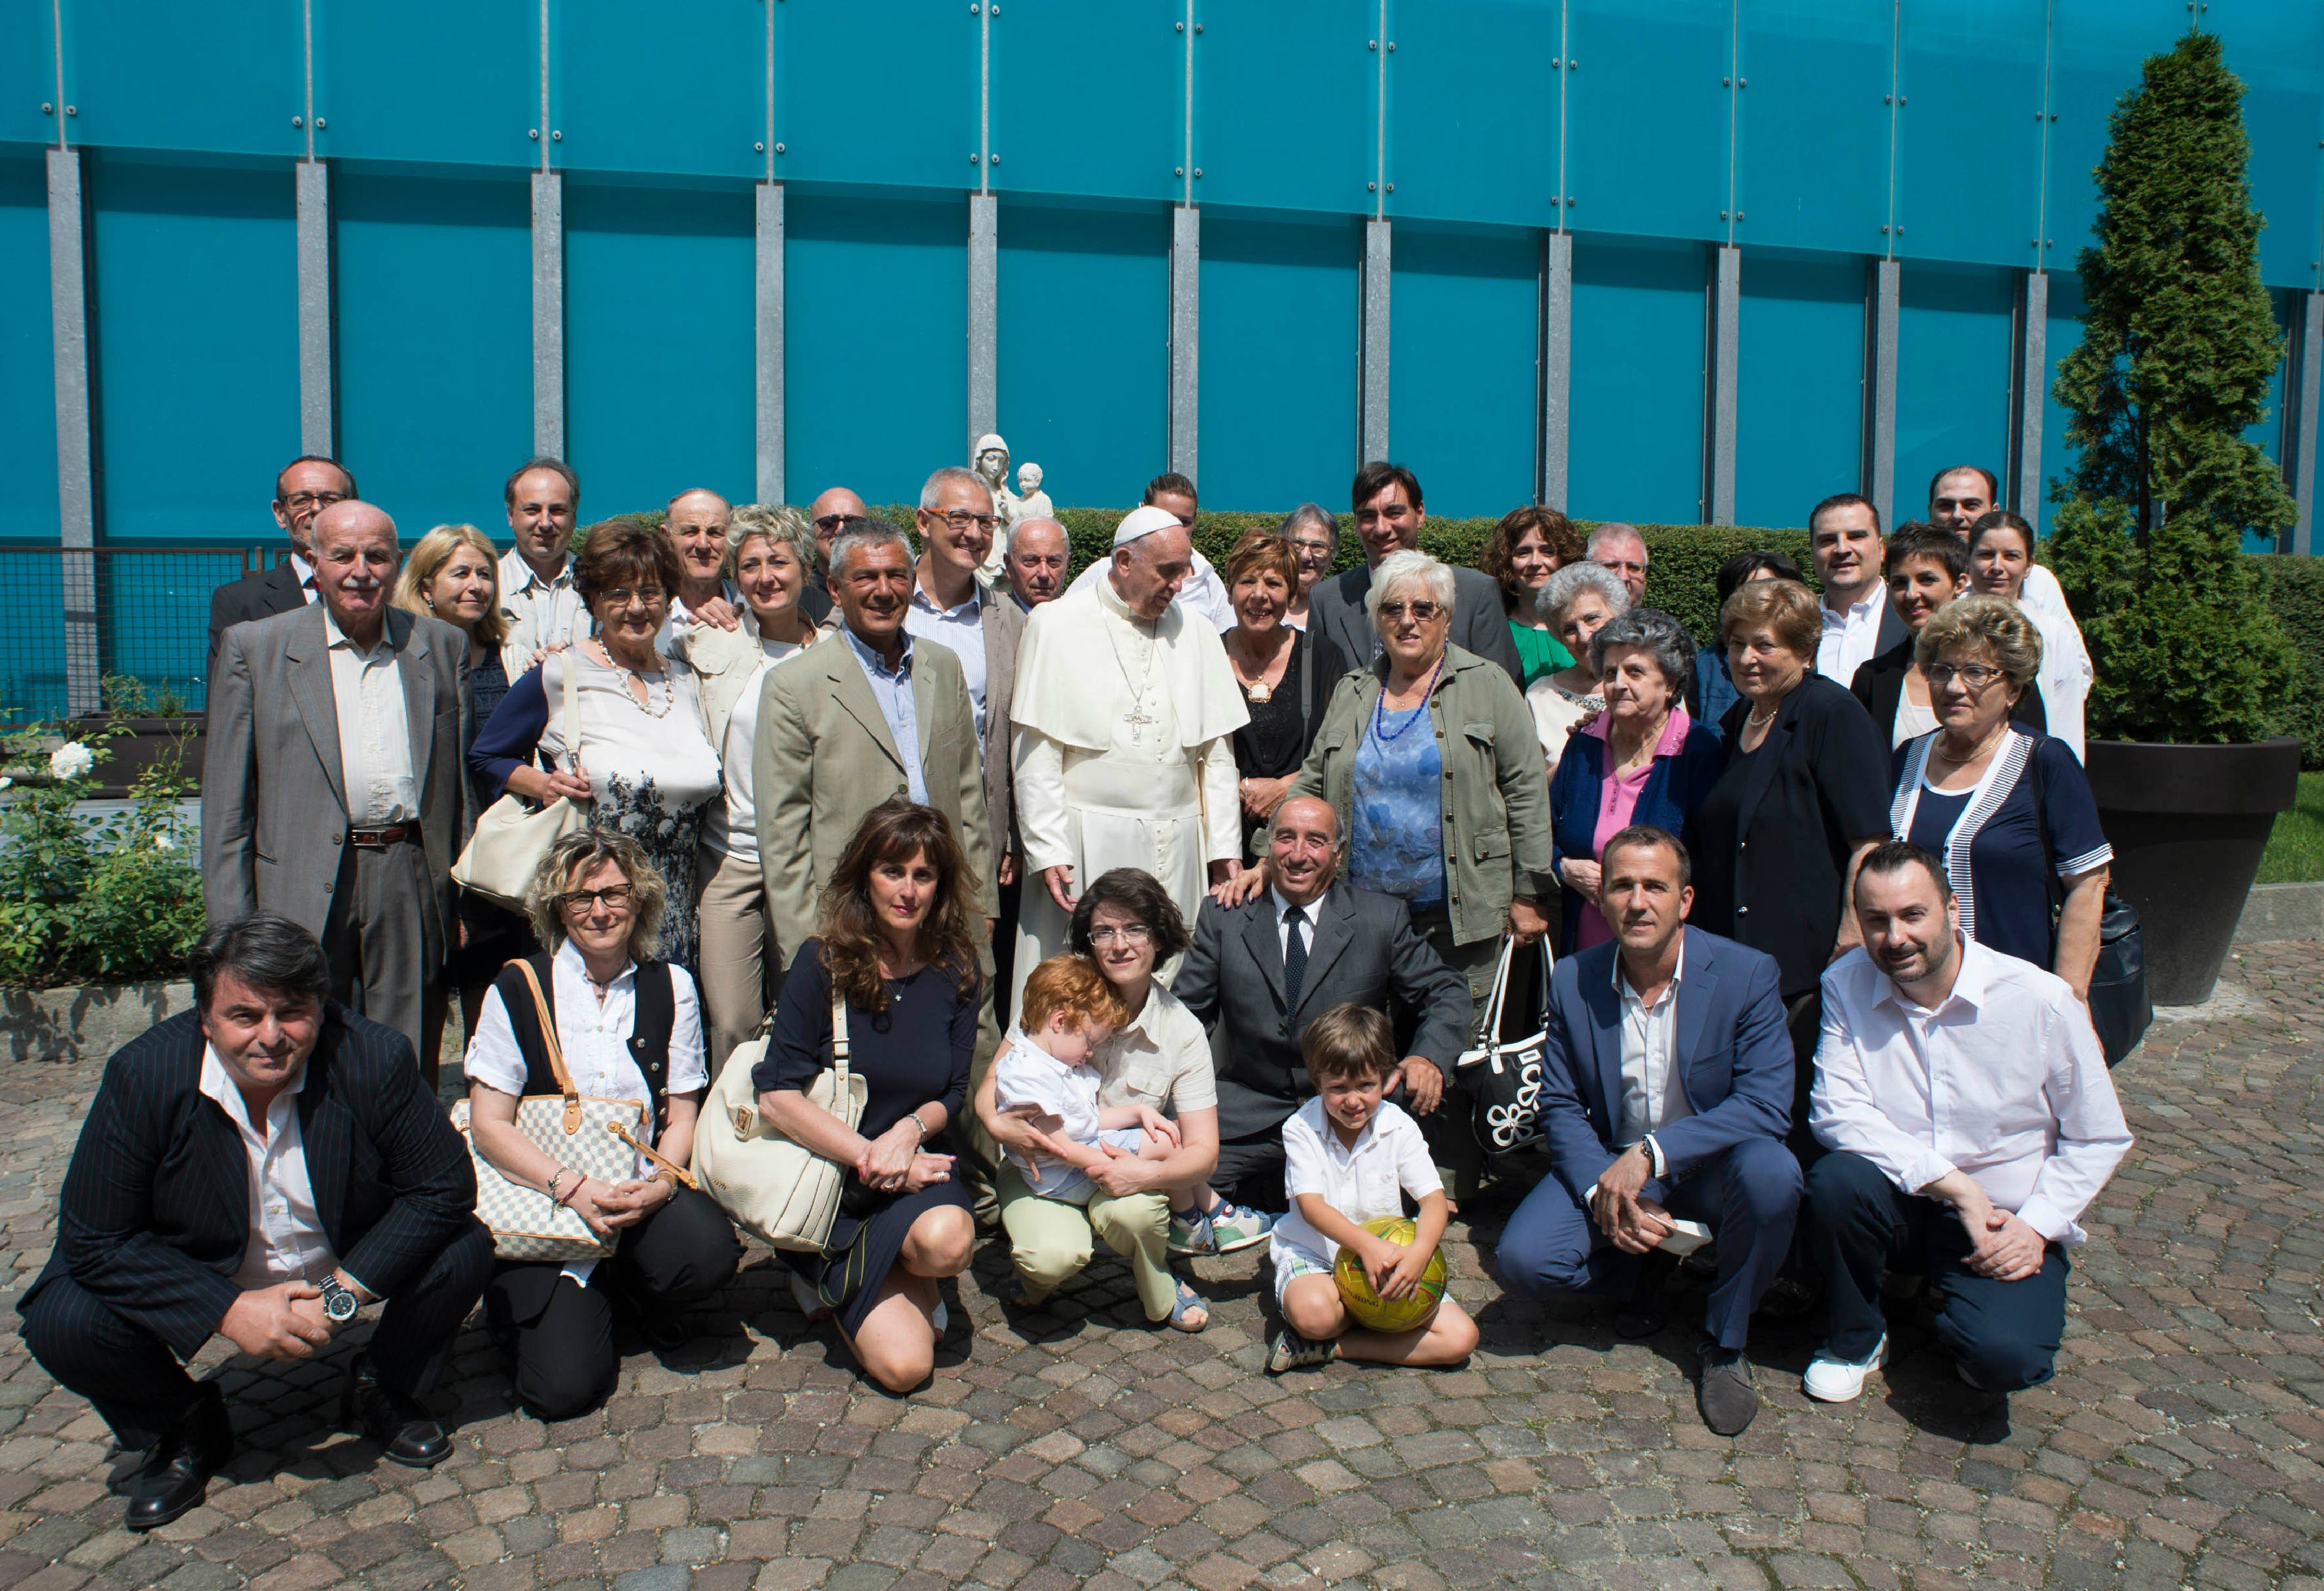 Pope Francis met with some members of his family during a strictly private meeting